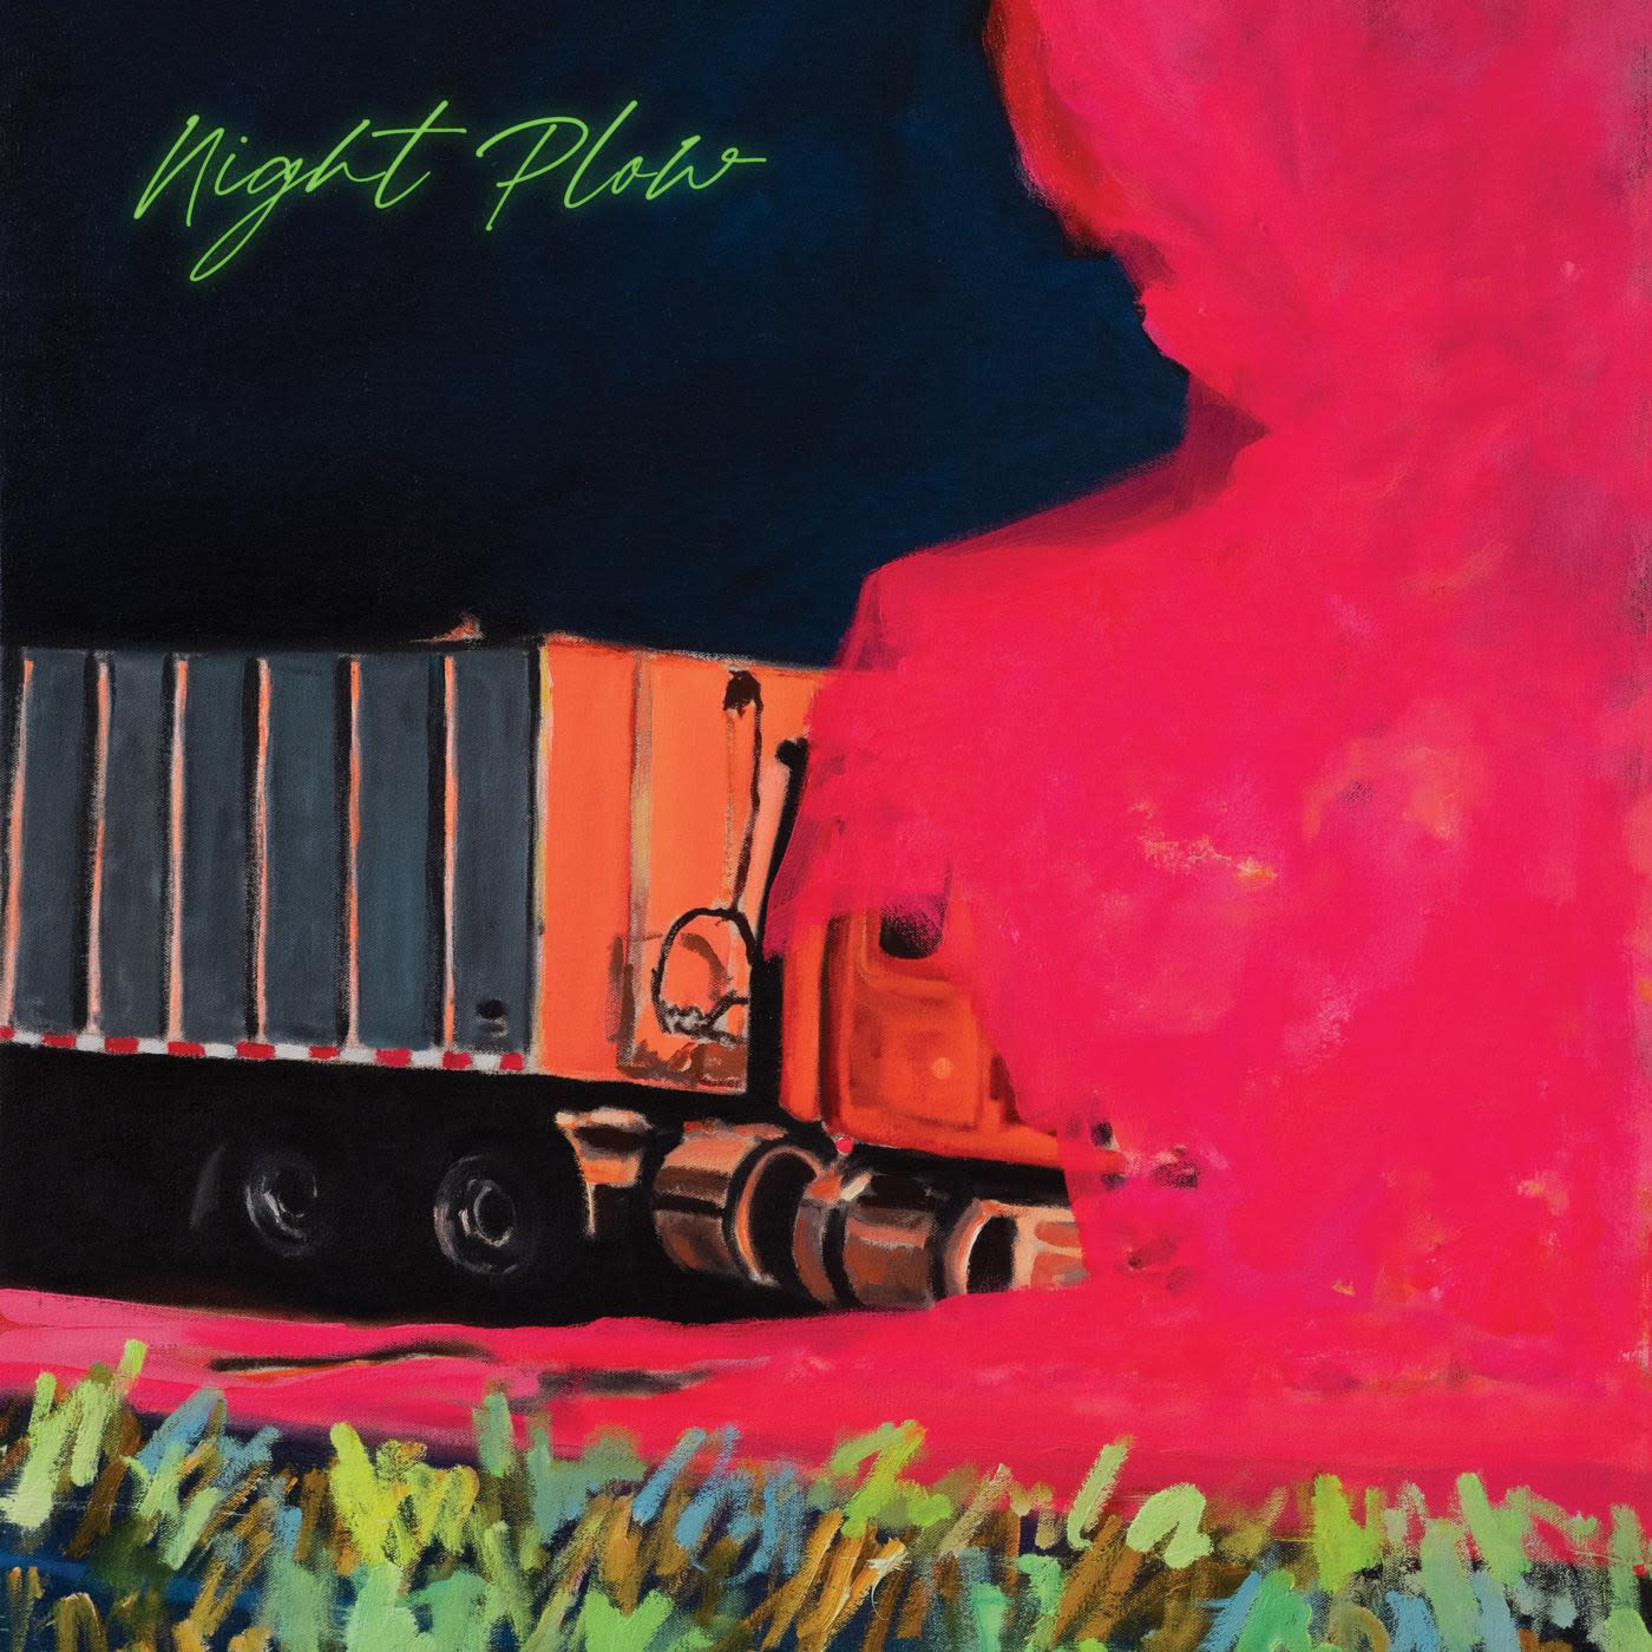 We Are Busy Bodies Night Plow - Night Plow (LP)